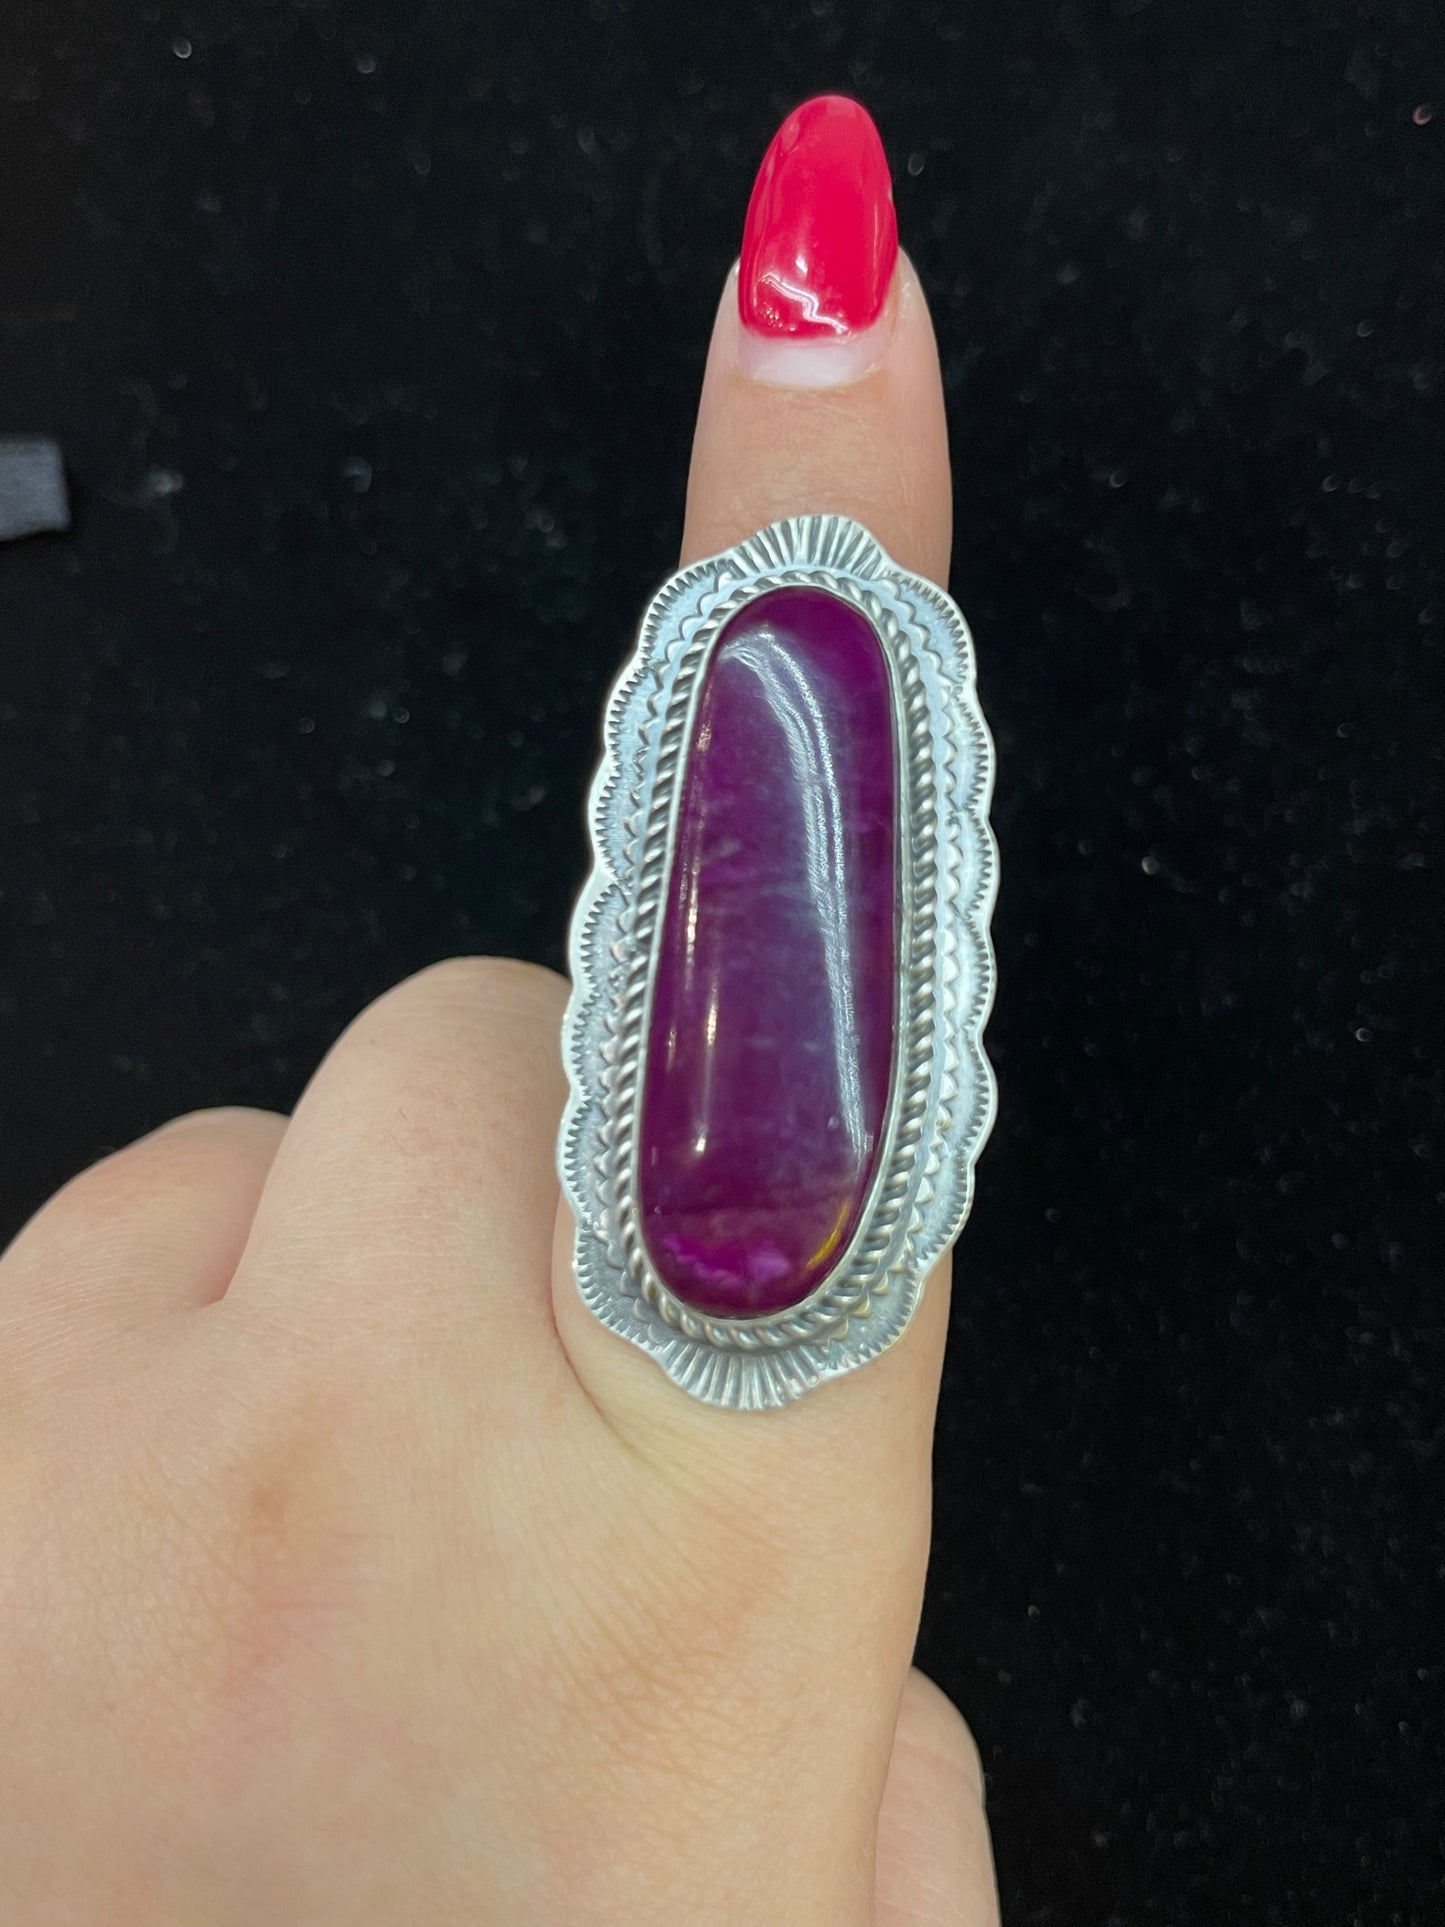 Adjustable Sugilite Ring by G. Platero, Navajo